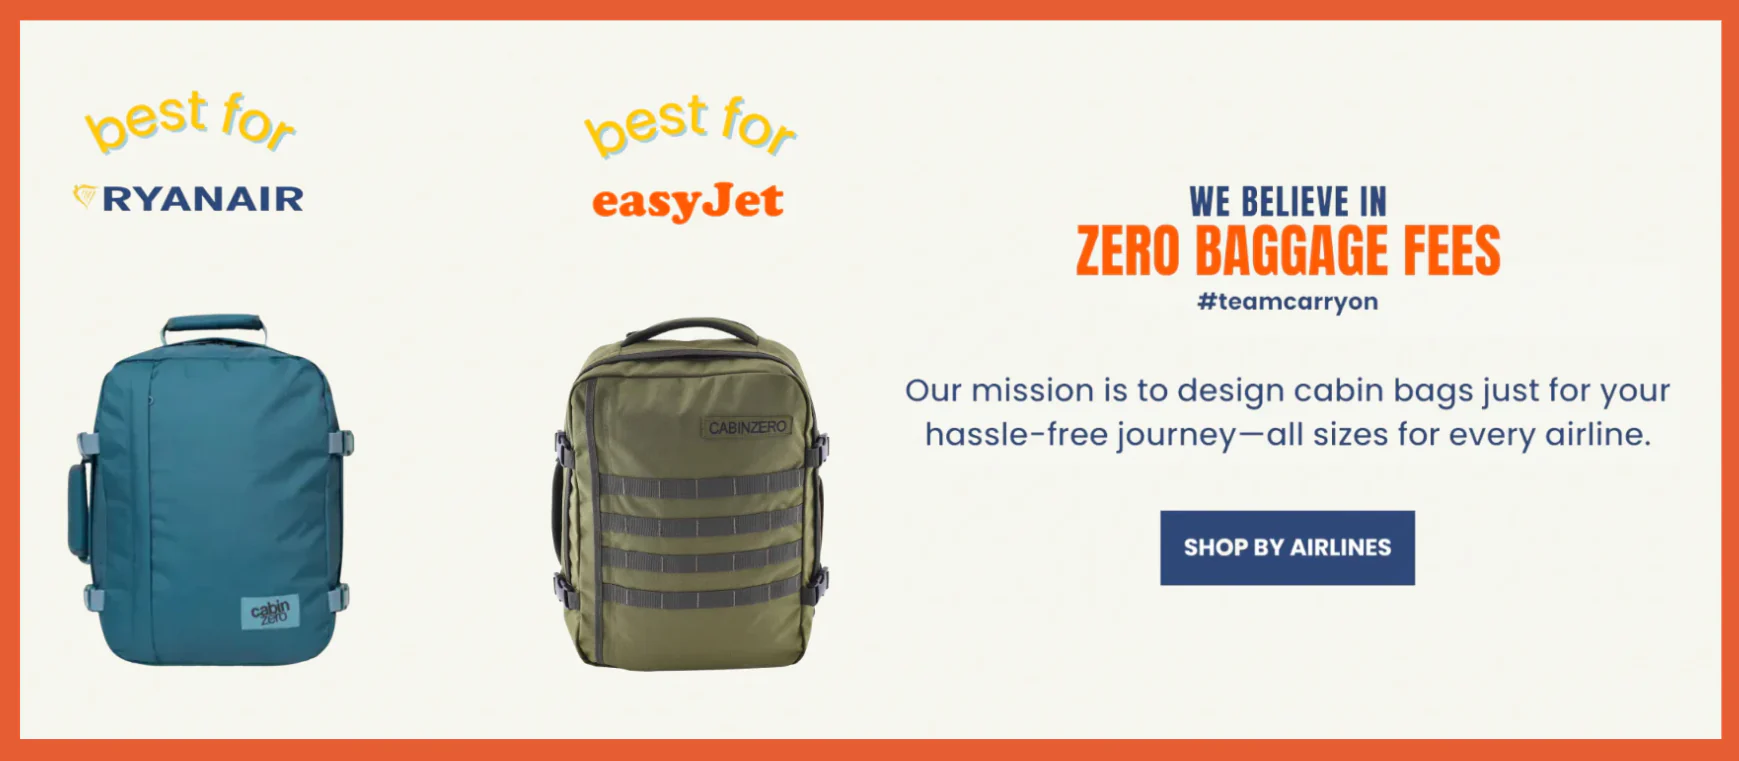 https://www.cabinzero.com/blogs/cabin-bag/is-a-backpack-a-personal-item